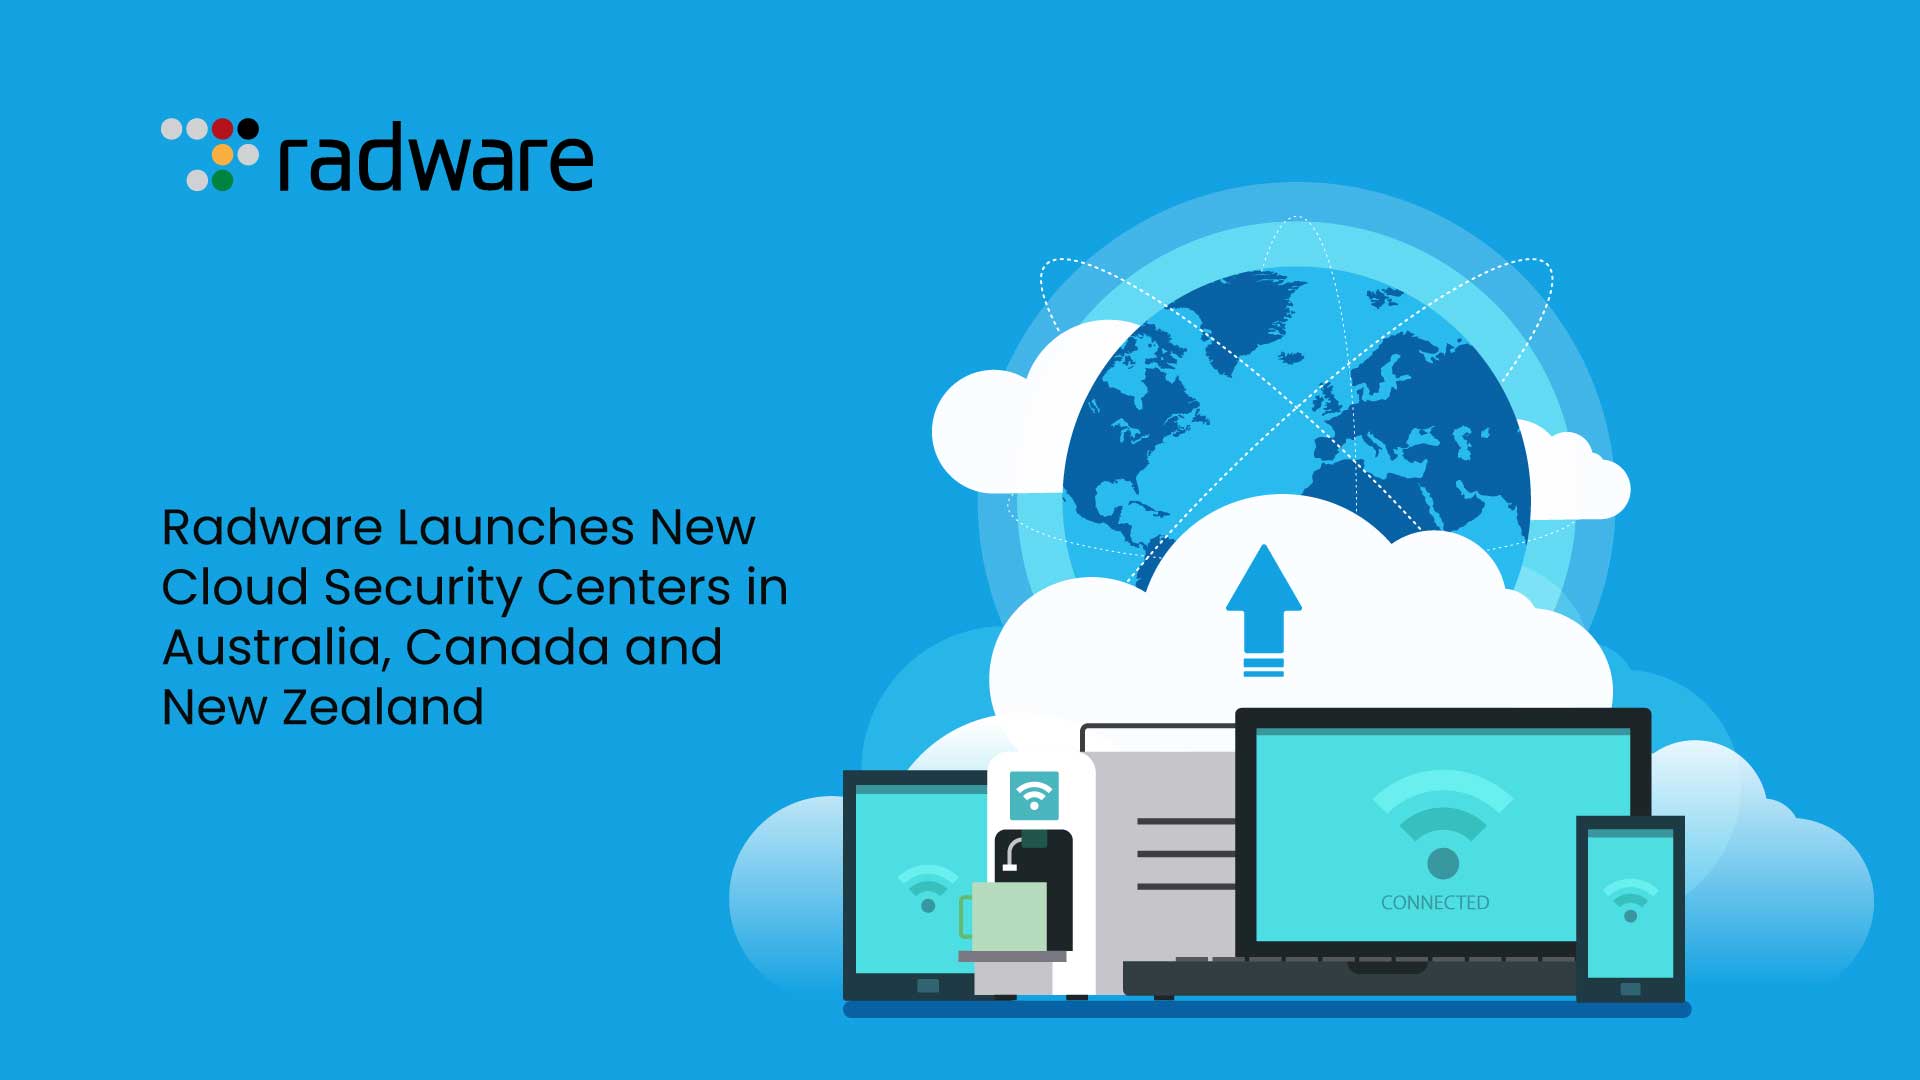 Radware Launches New Cloud Security Centers in Australia, Canada and New Zealand